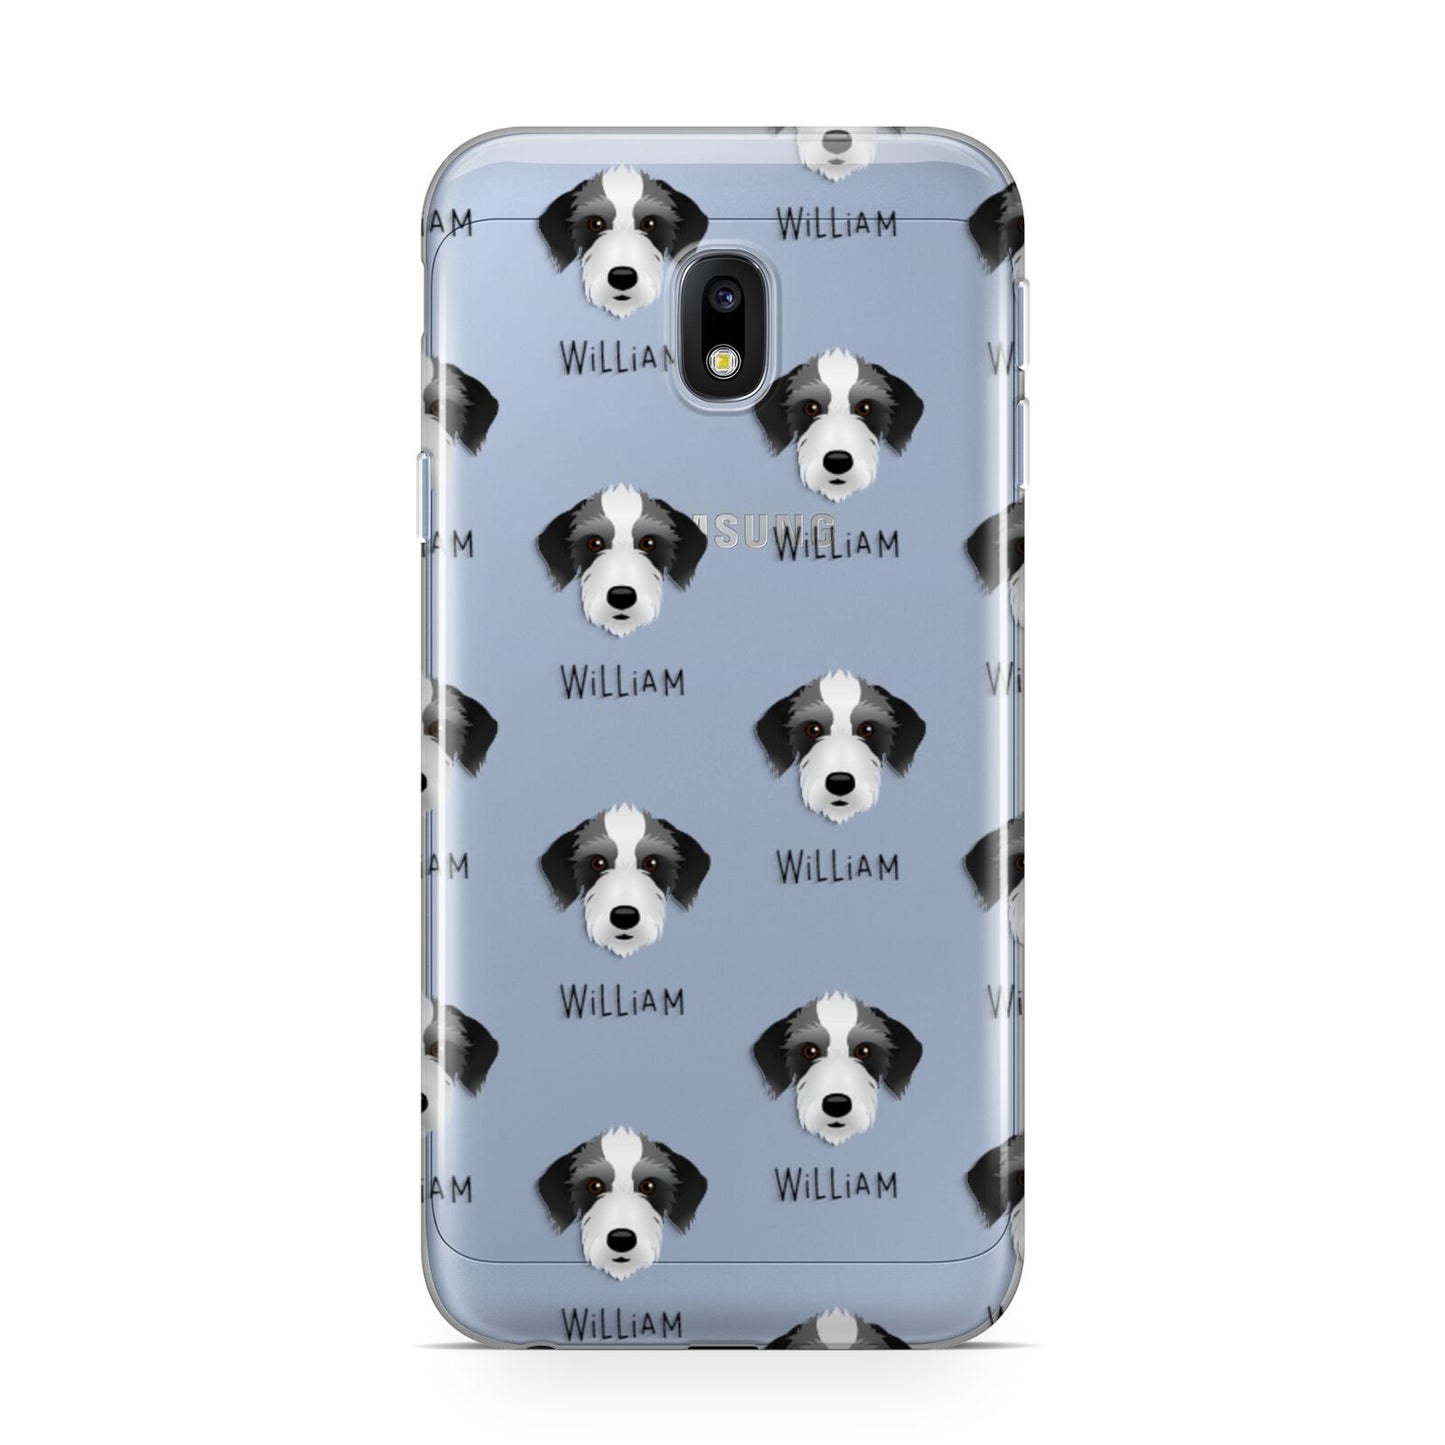 Bedlington Whippet Icon with Name Samsung Galaxy J3 2017 Case